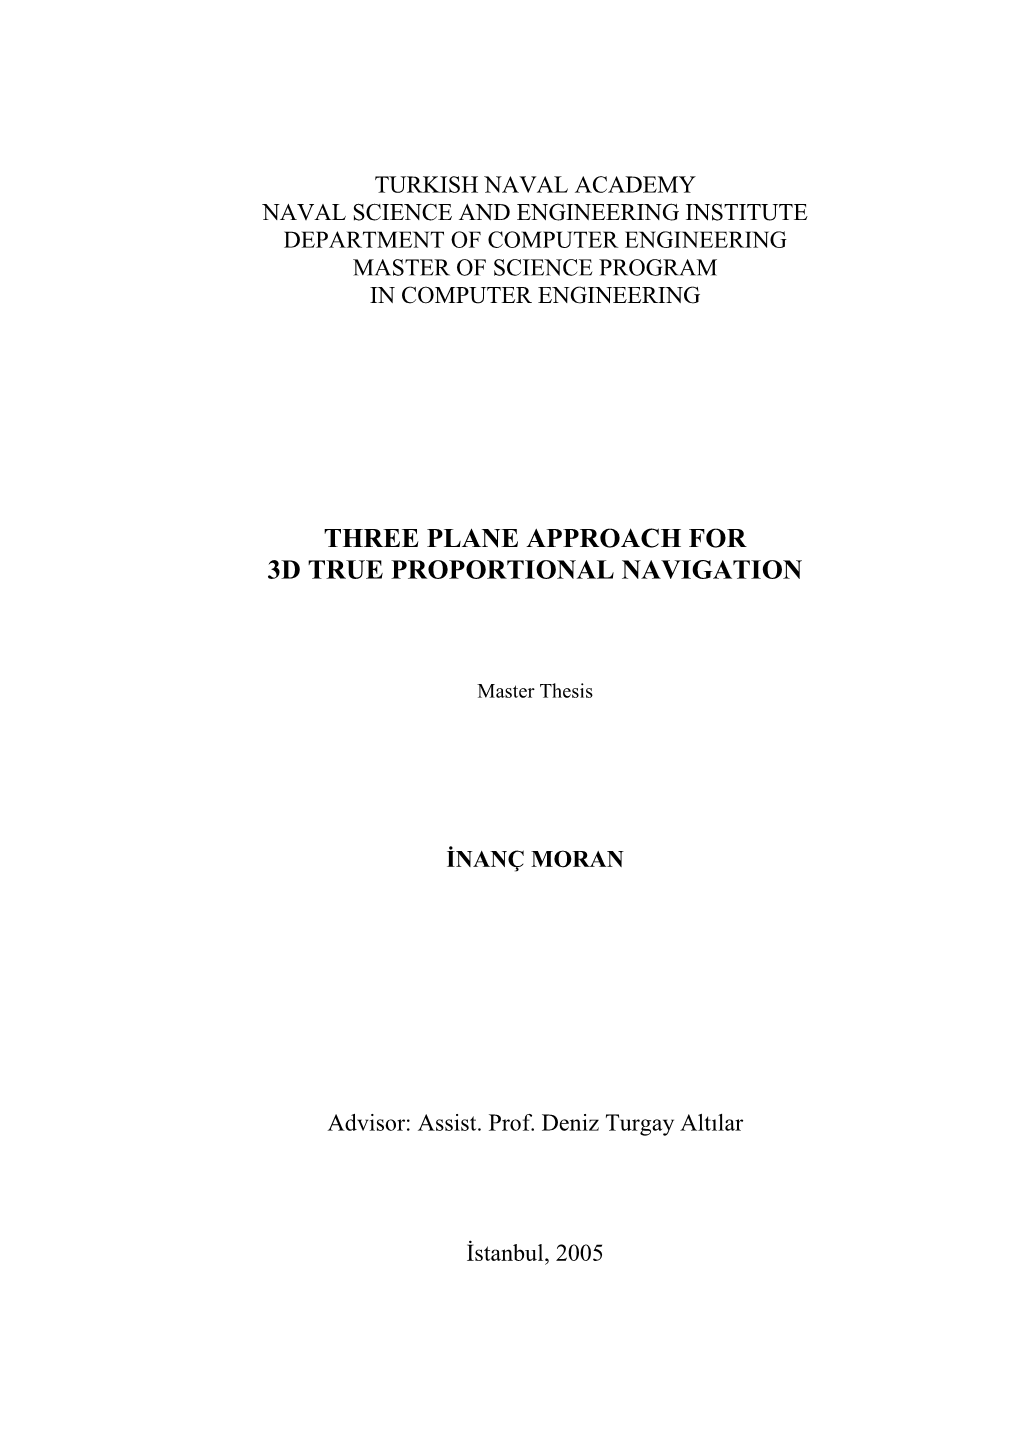 Three Plane Approach for 3D True Proportional Navigation